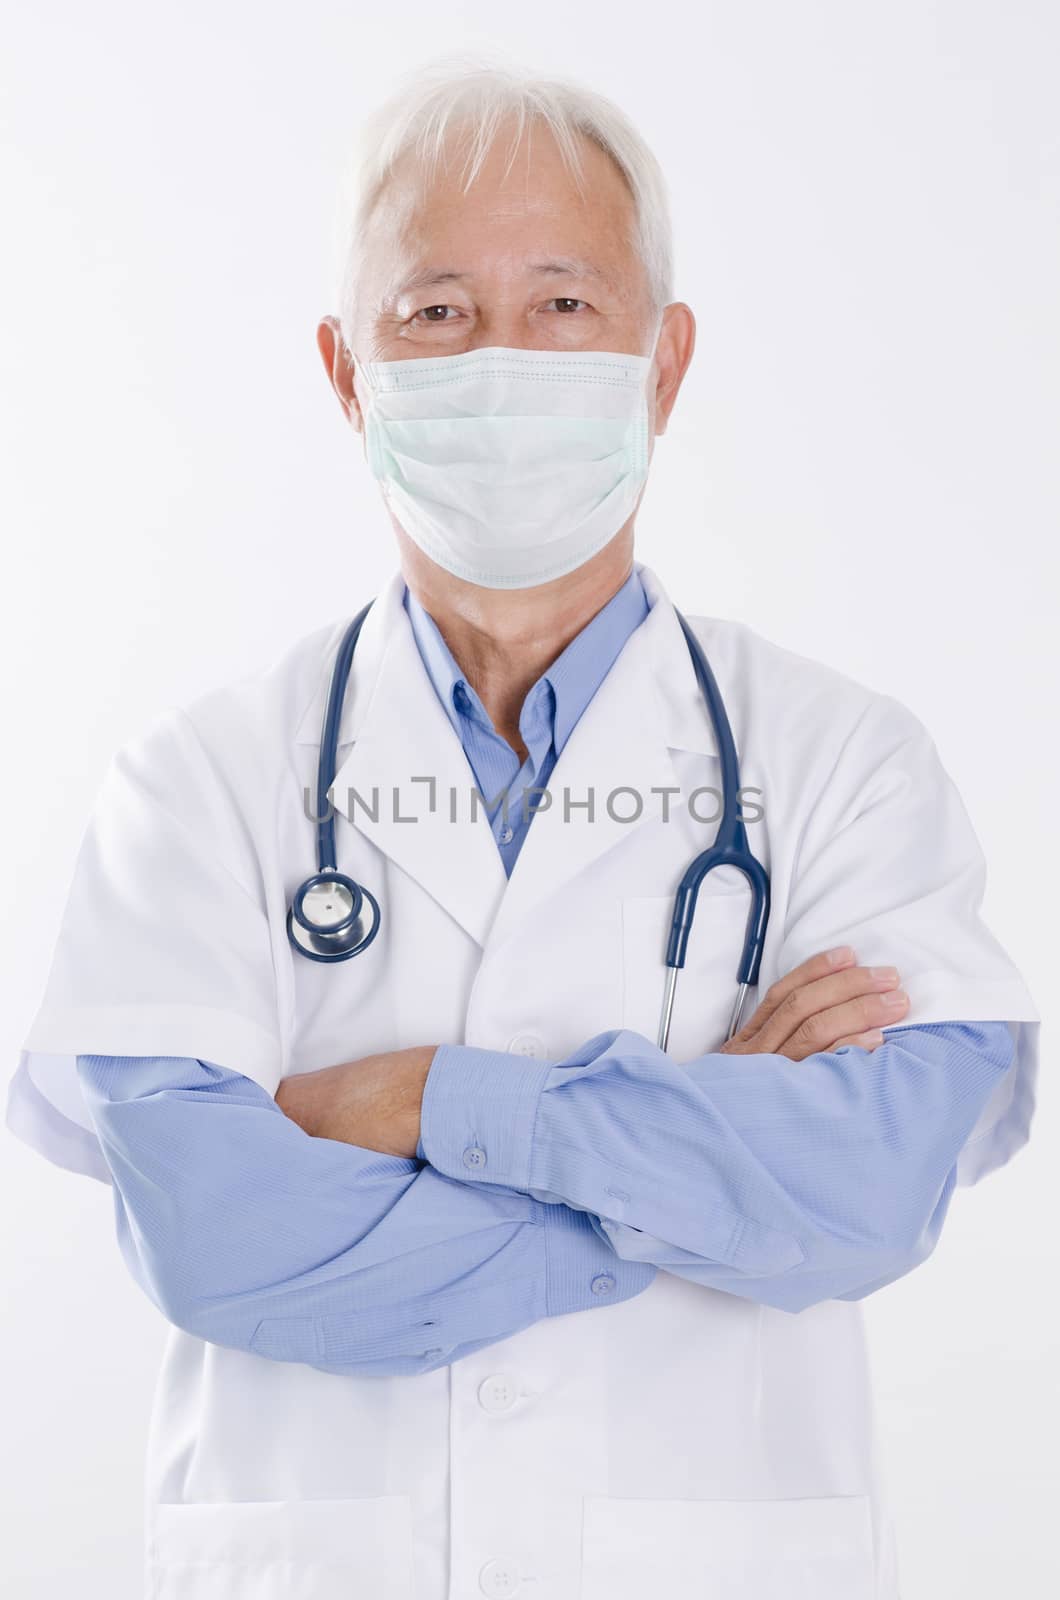 Portrait of Asian medical doctor in face mask arms crossed, standing isolated on white background.